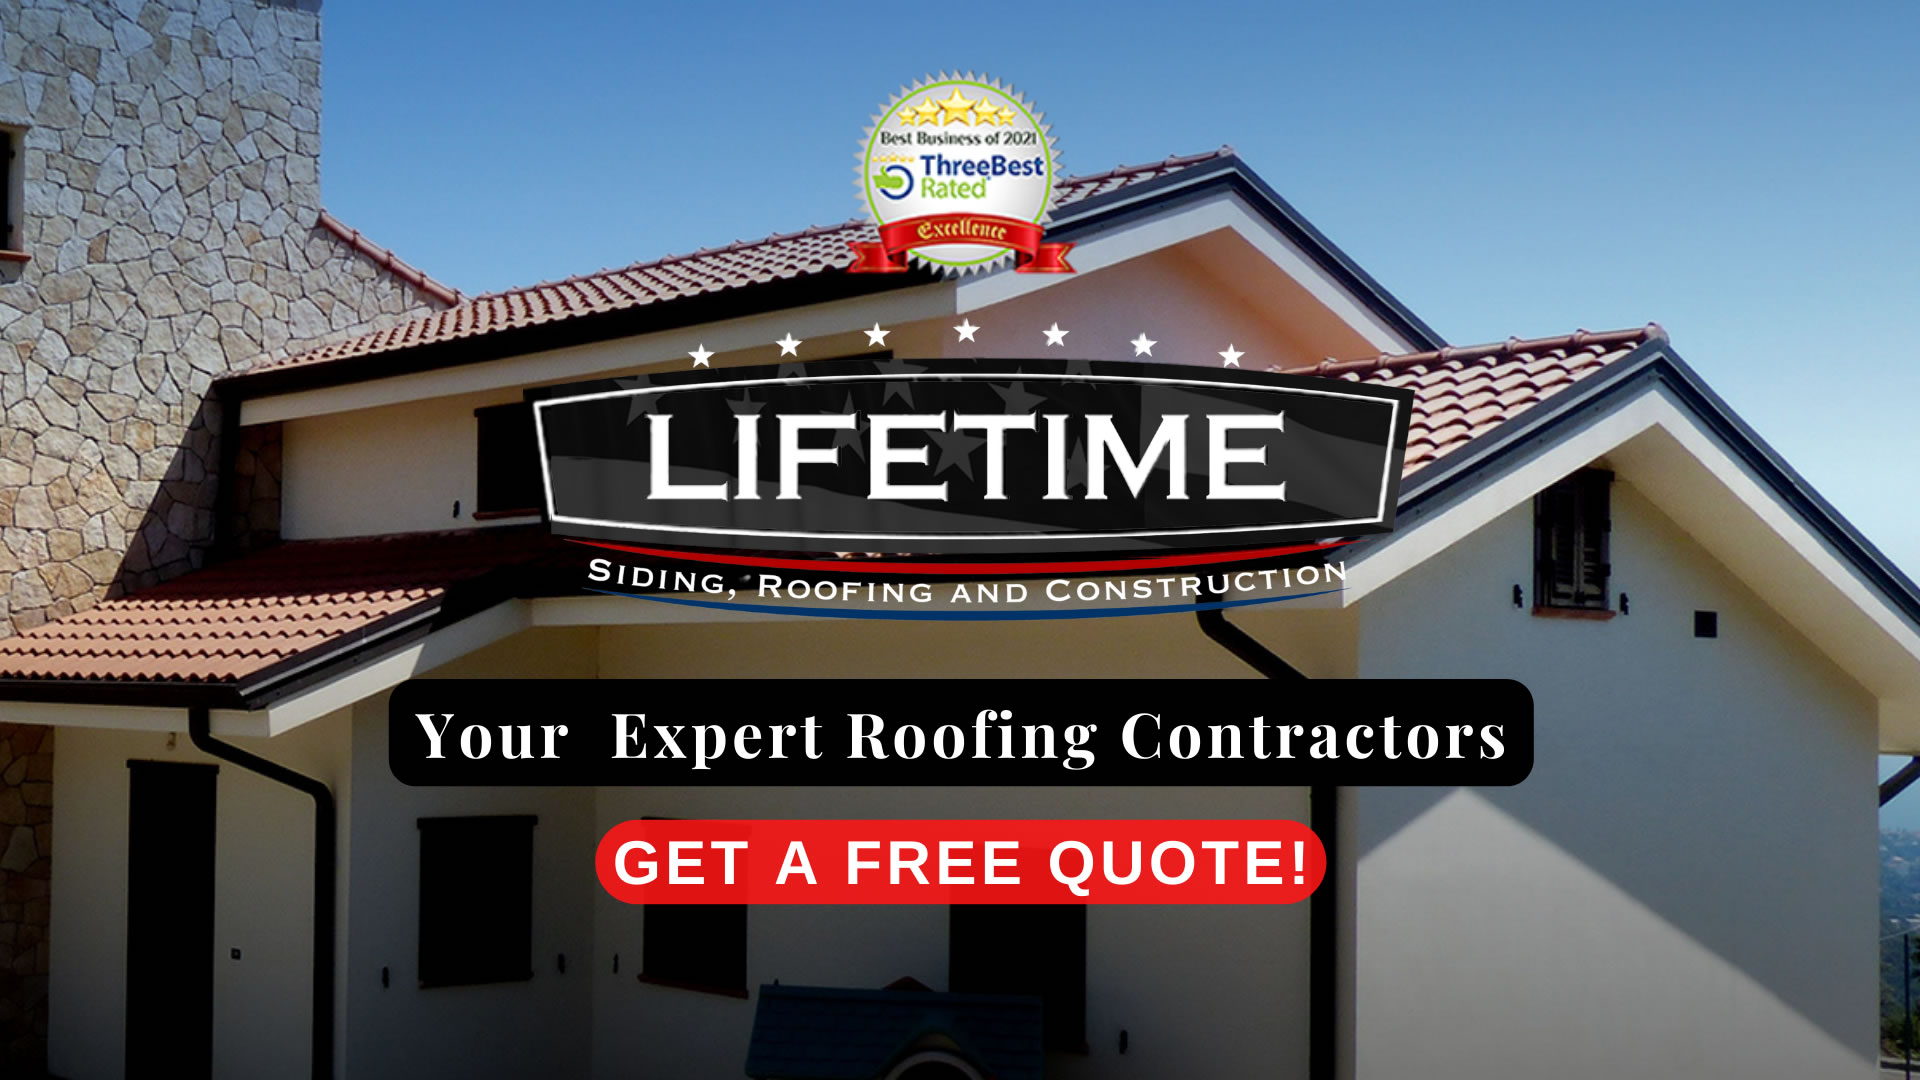 Lifetime, Siding and Roofing Construction